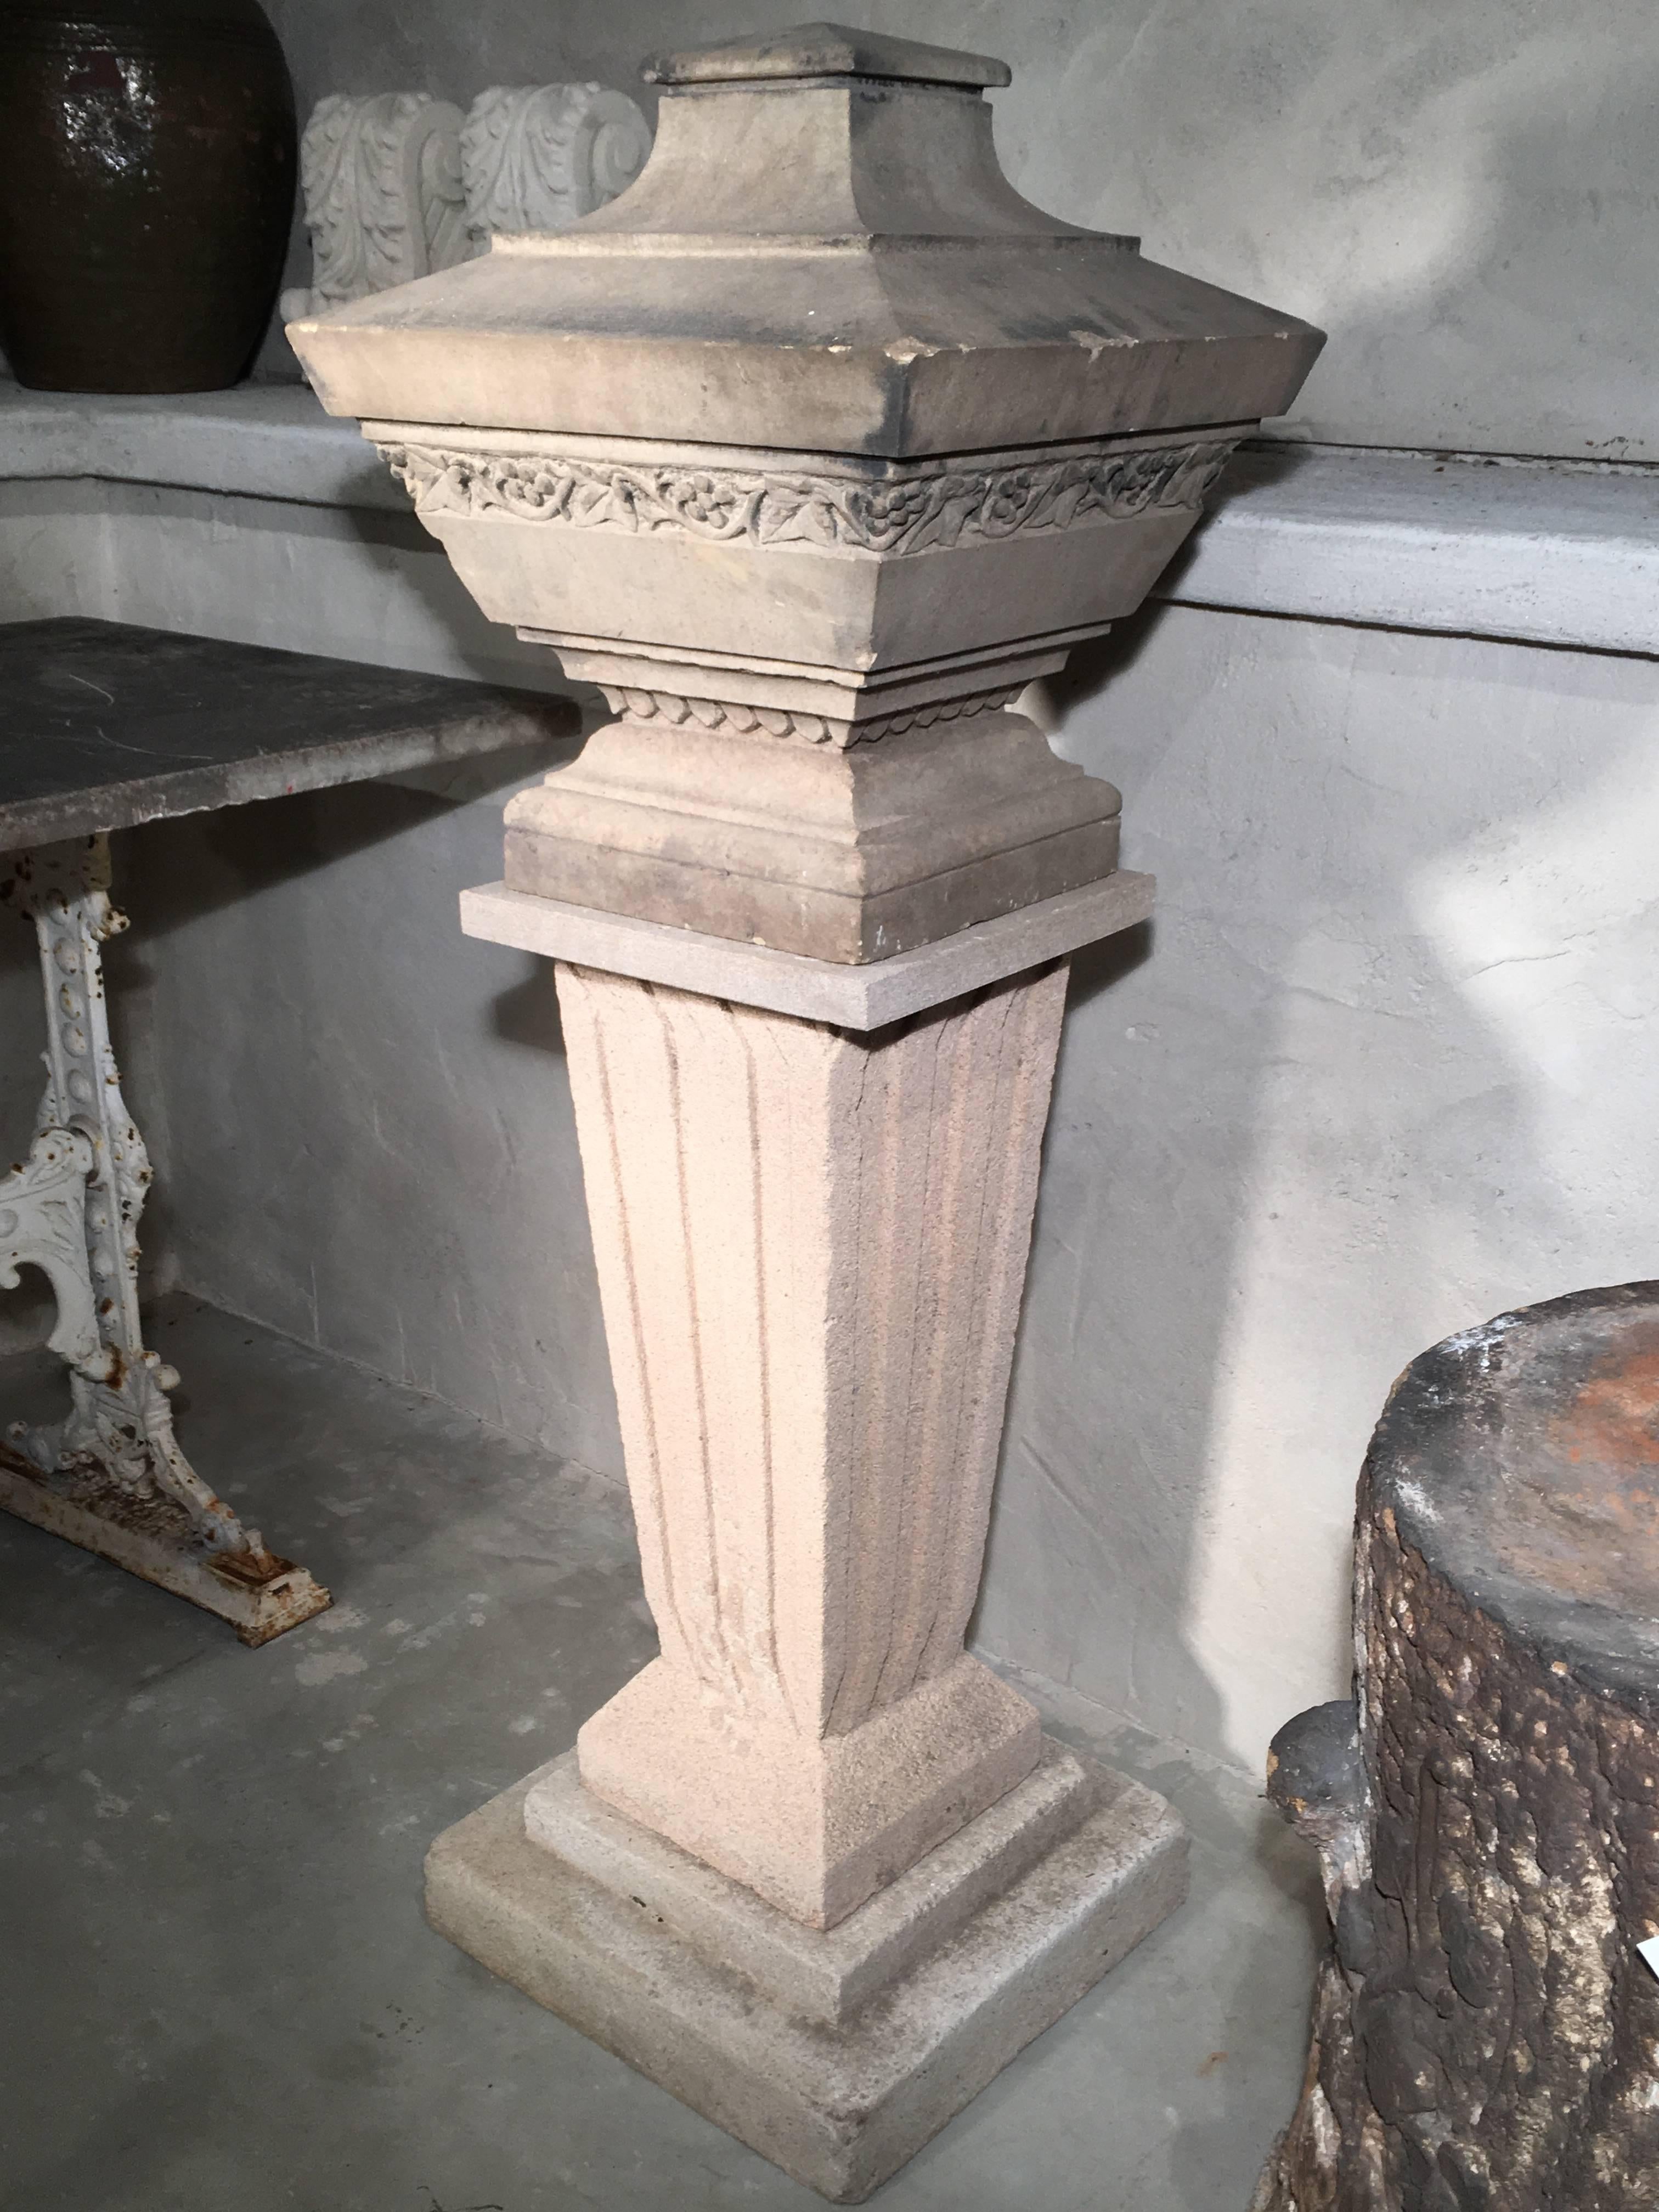 We have married this unusually shaped solid carved stone urn dating from the mid-1800s with a tall cast stone pedestal with tapering rectangular fluted form. The urn has wonderful carving on all four sides and both pieces are in excellent condition.